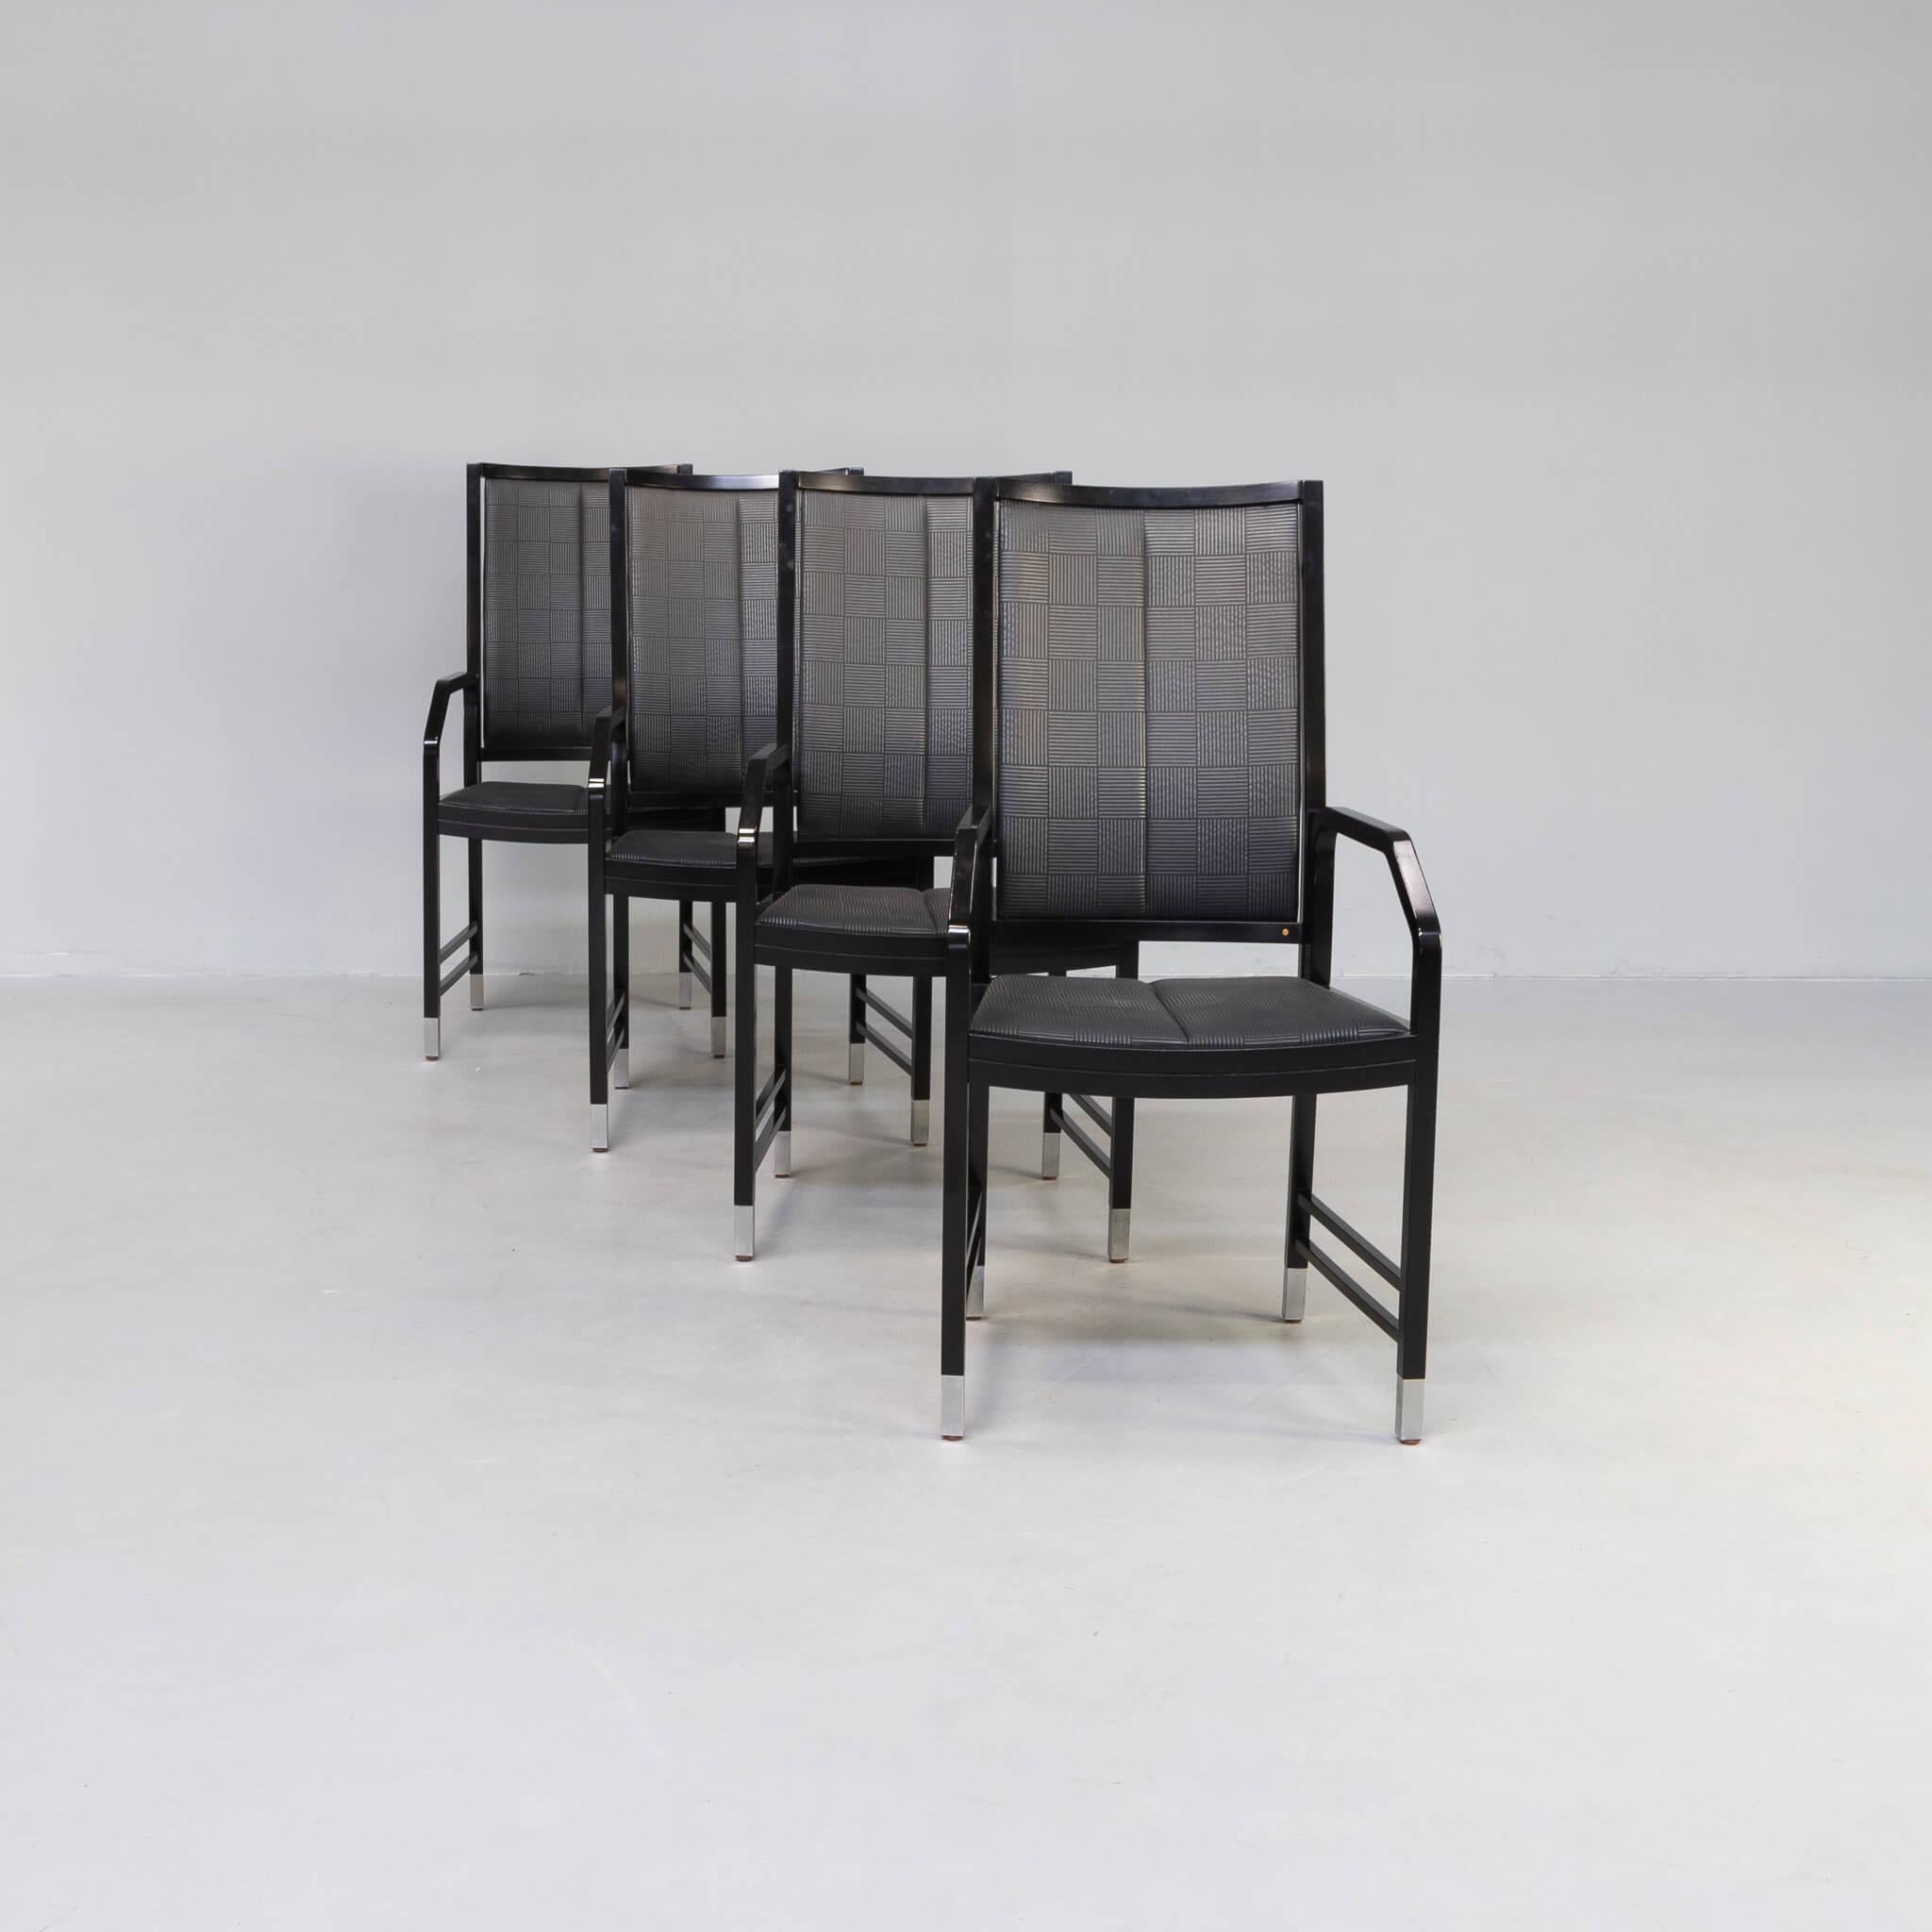 4 Black lacquered wooden dining chairs references to some great designer of the 19th and 20th Centuries: Michael Thonet, Josef Hoffman and Otto Wagner. This set of chairs was designed by Ernst W. Beranek in Germany in the 1980s as an homage to the